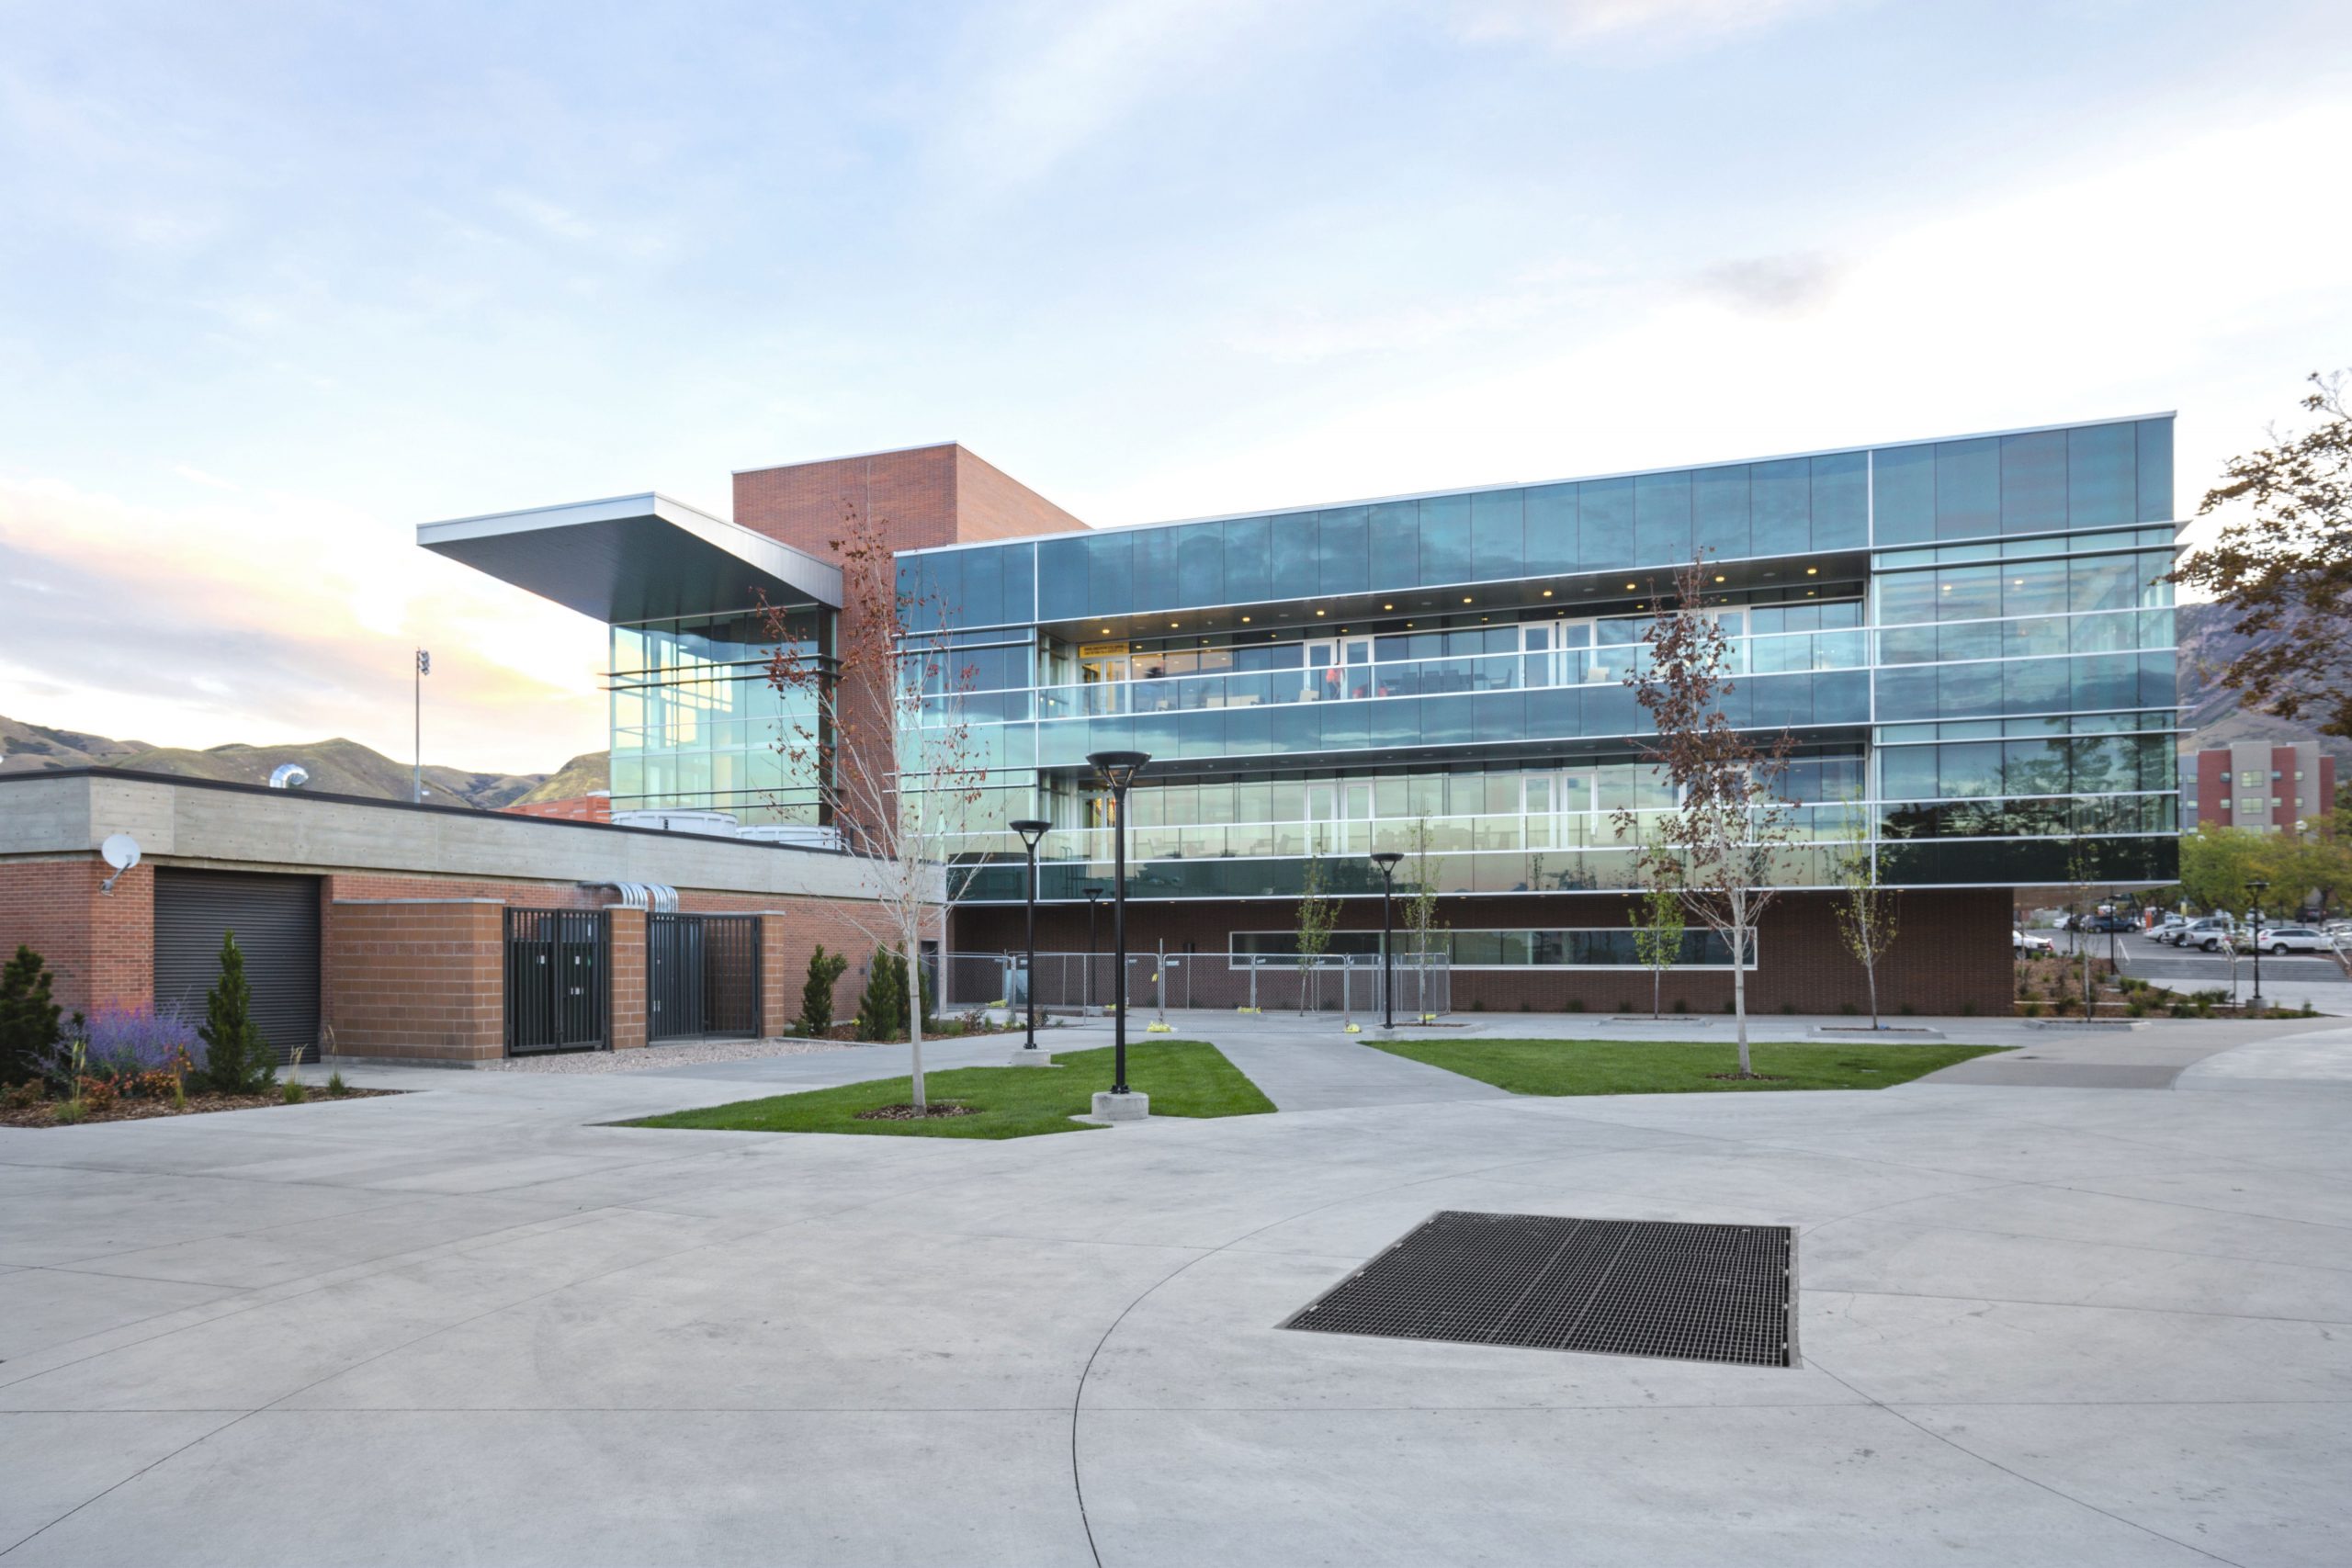 Exterior of the University of Utah Basketball Facility, architectural design by Elliott Workgroup